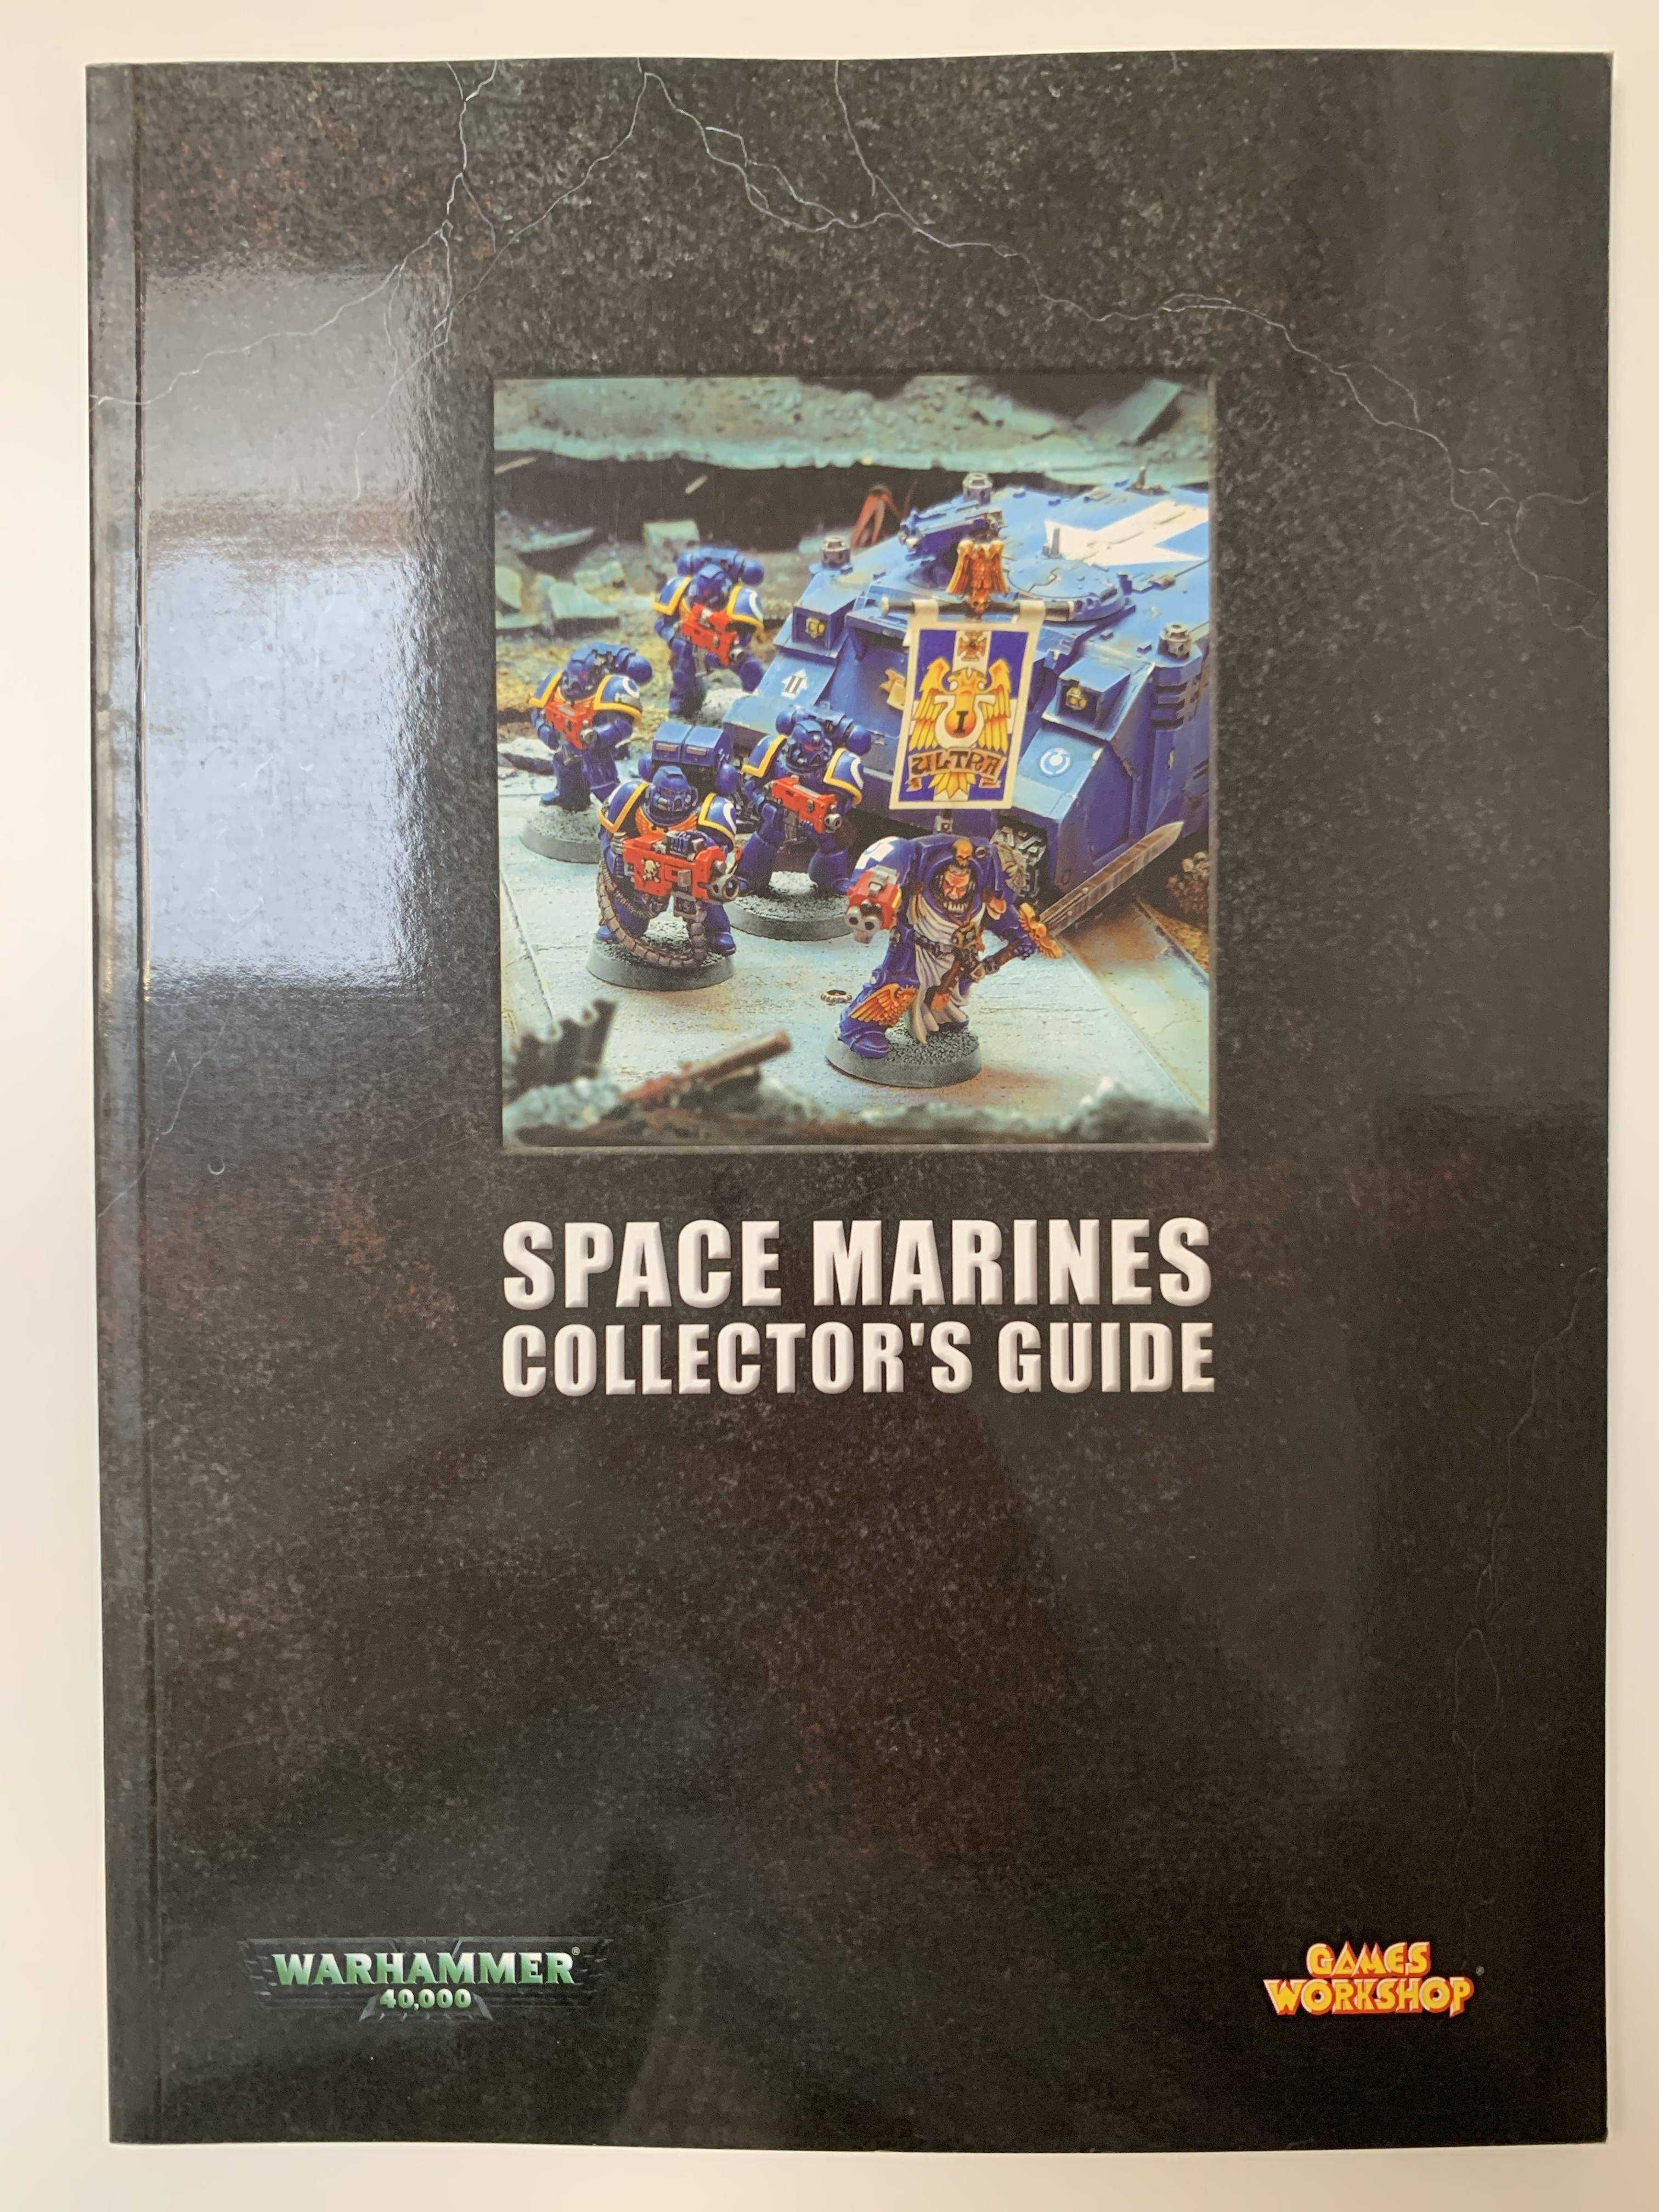 Warhammer 40 000: Space Marines Collector's Guide